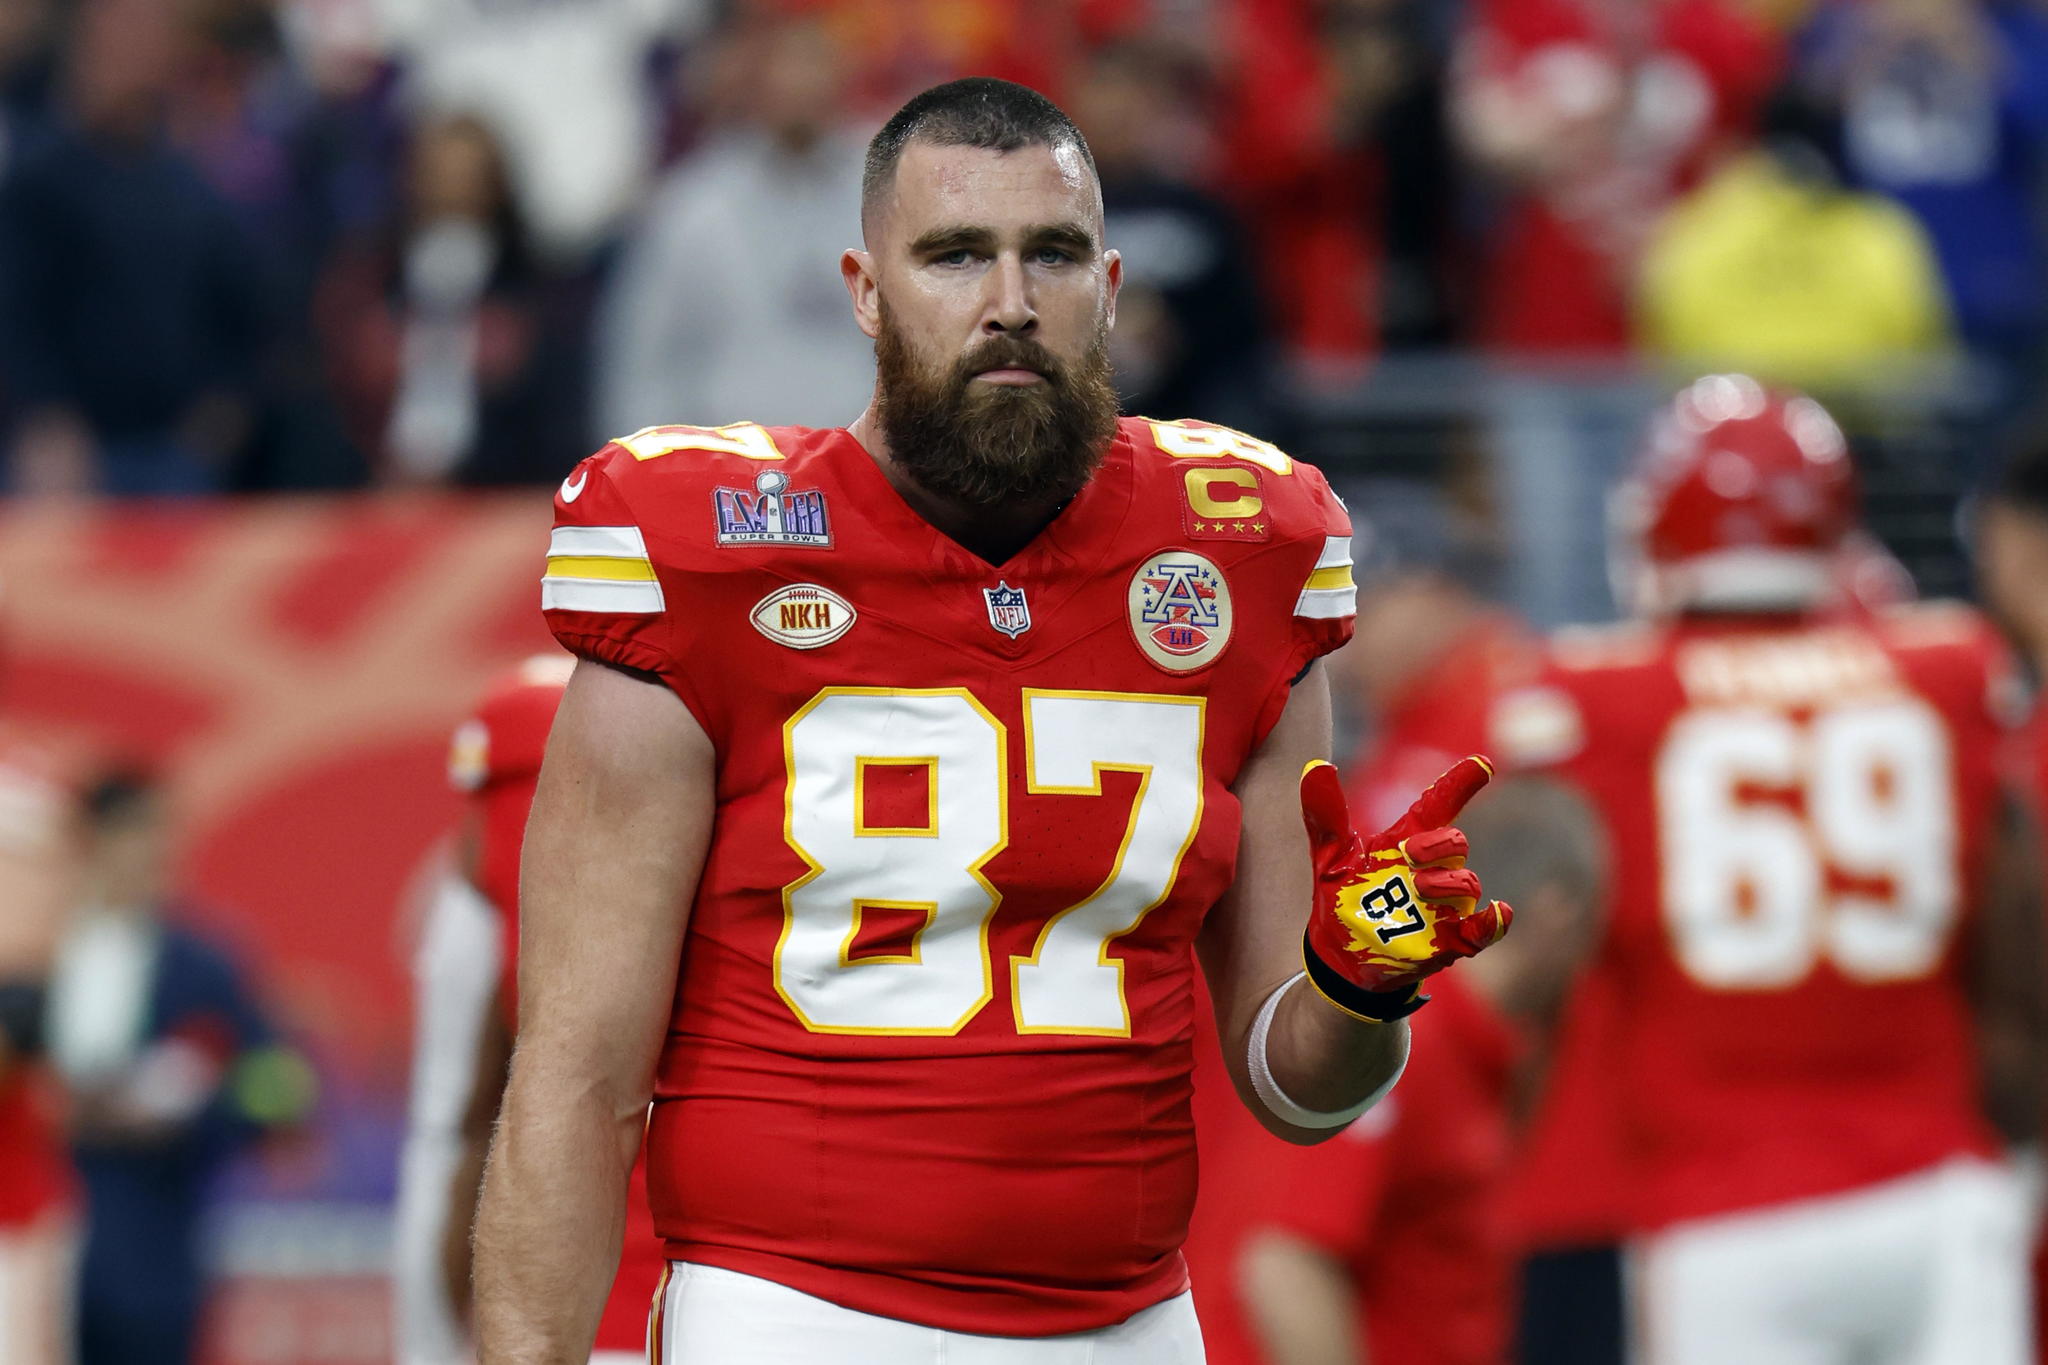 Kansas City Chiefs tight end Travis Kelce during warm-up